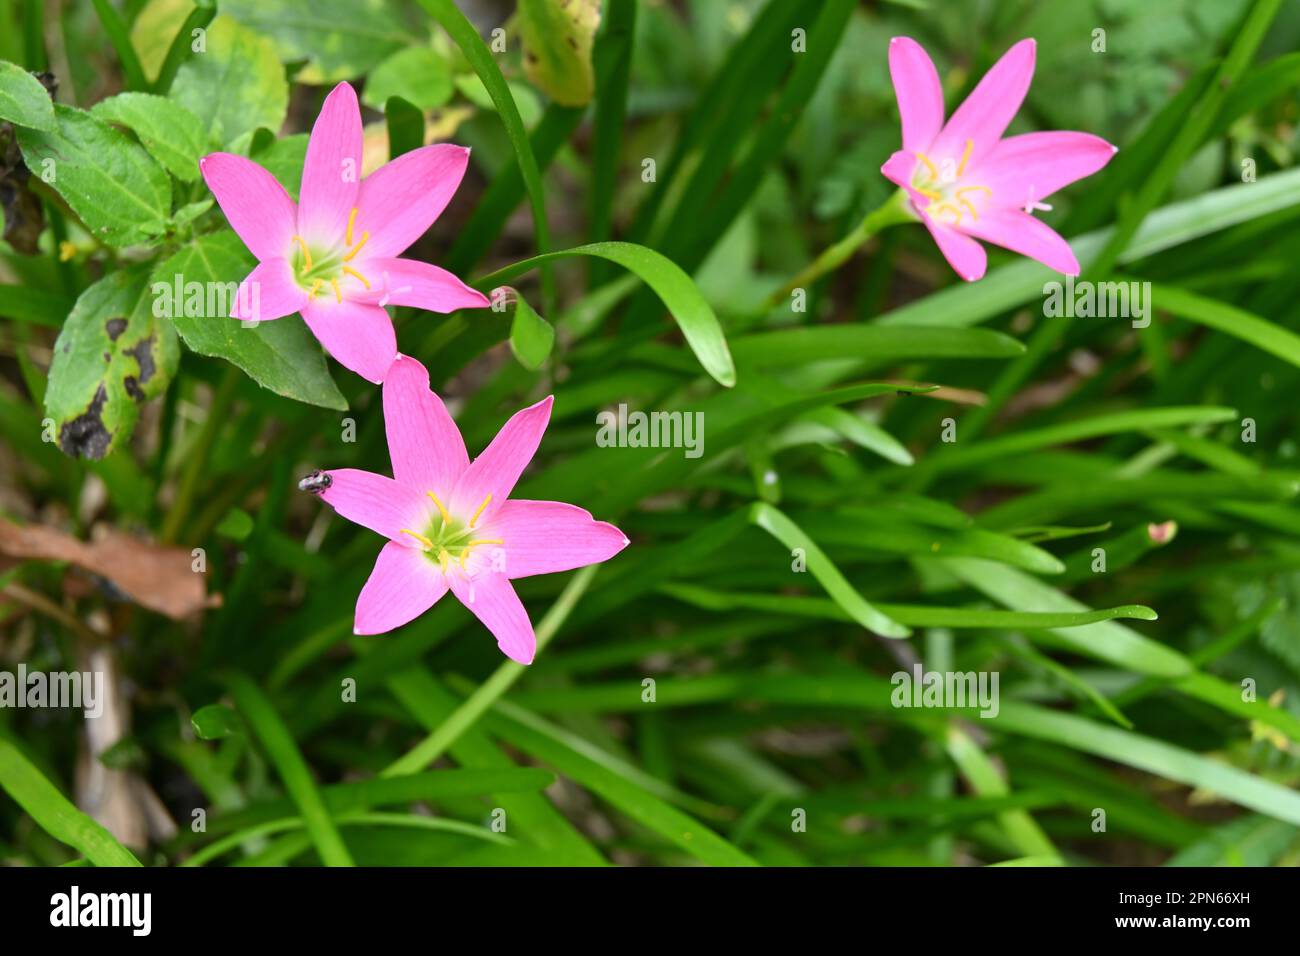 A pink Rose fairy lily flower bloomed in the garden , more Rose fairy lily flowers in the background Stock Photo